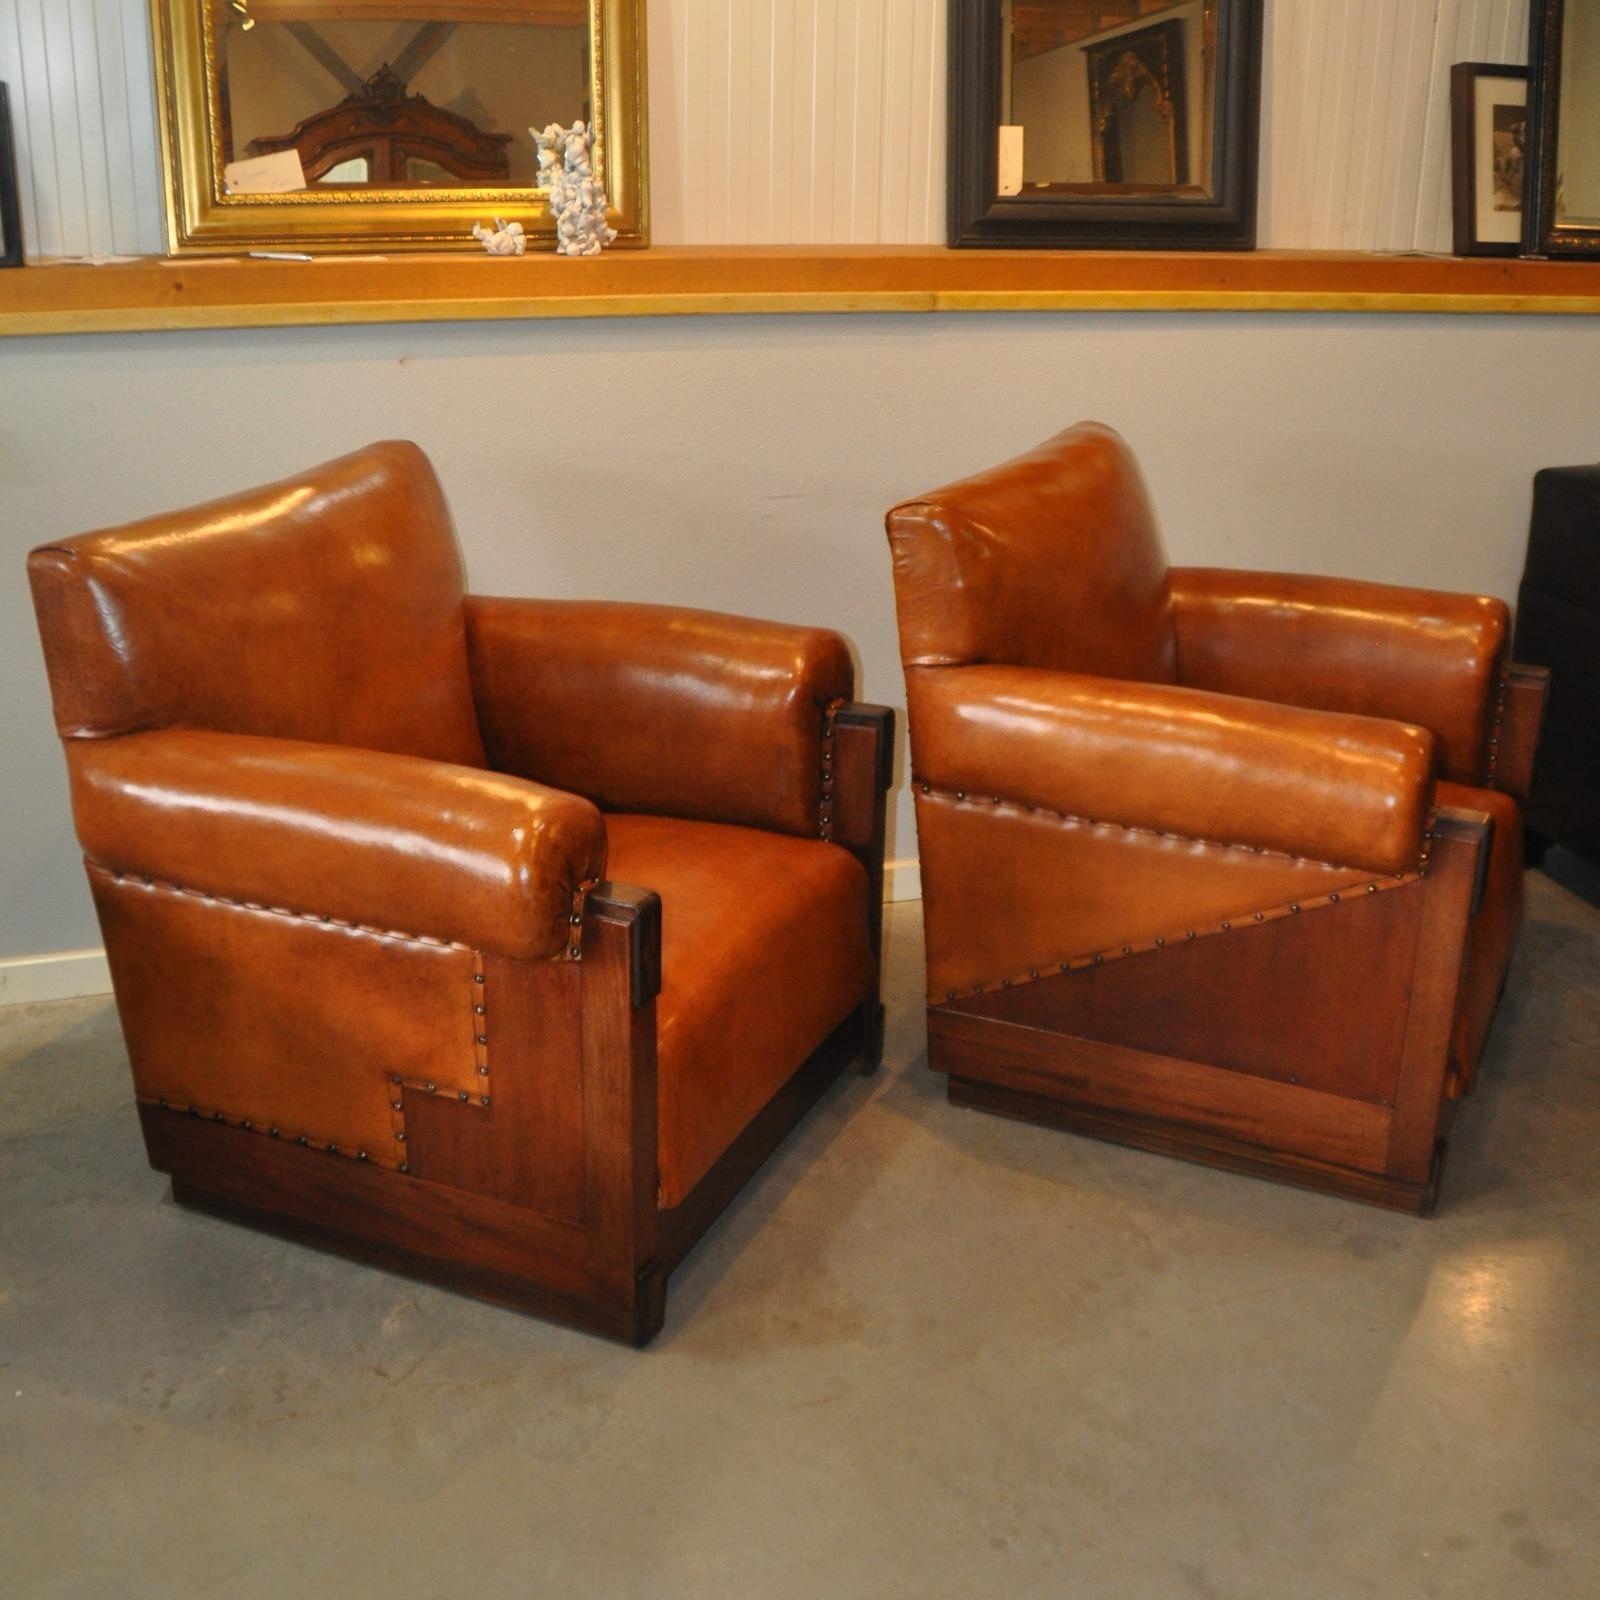 1930s style armchairs